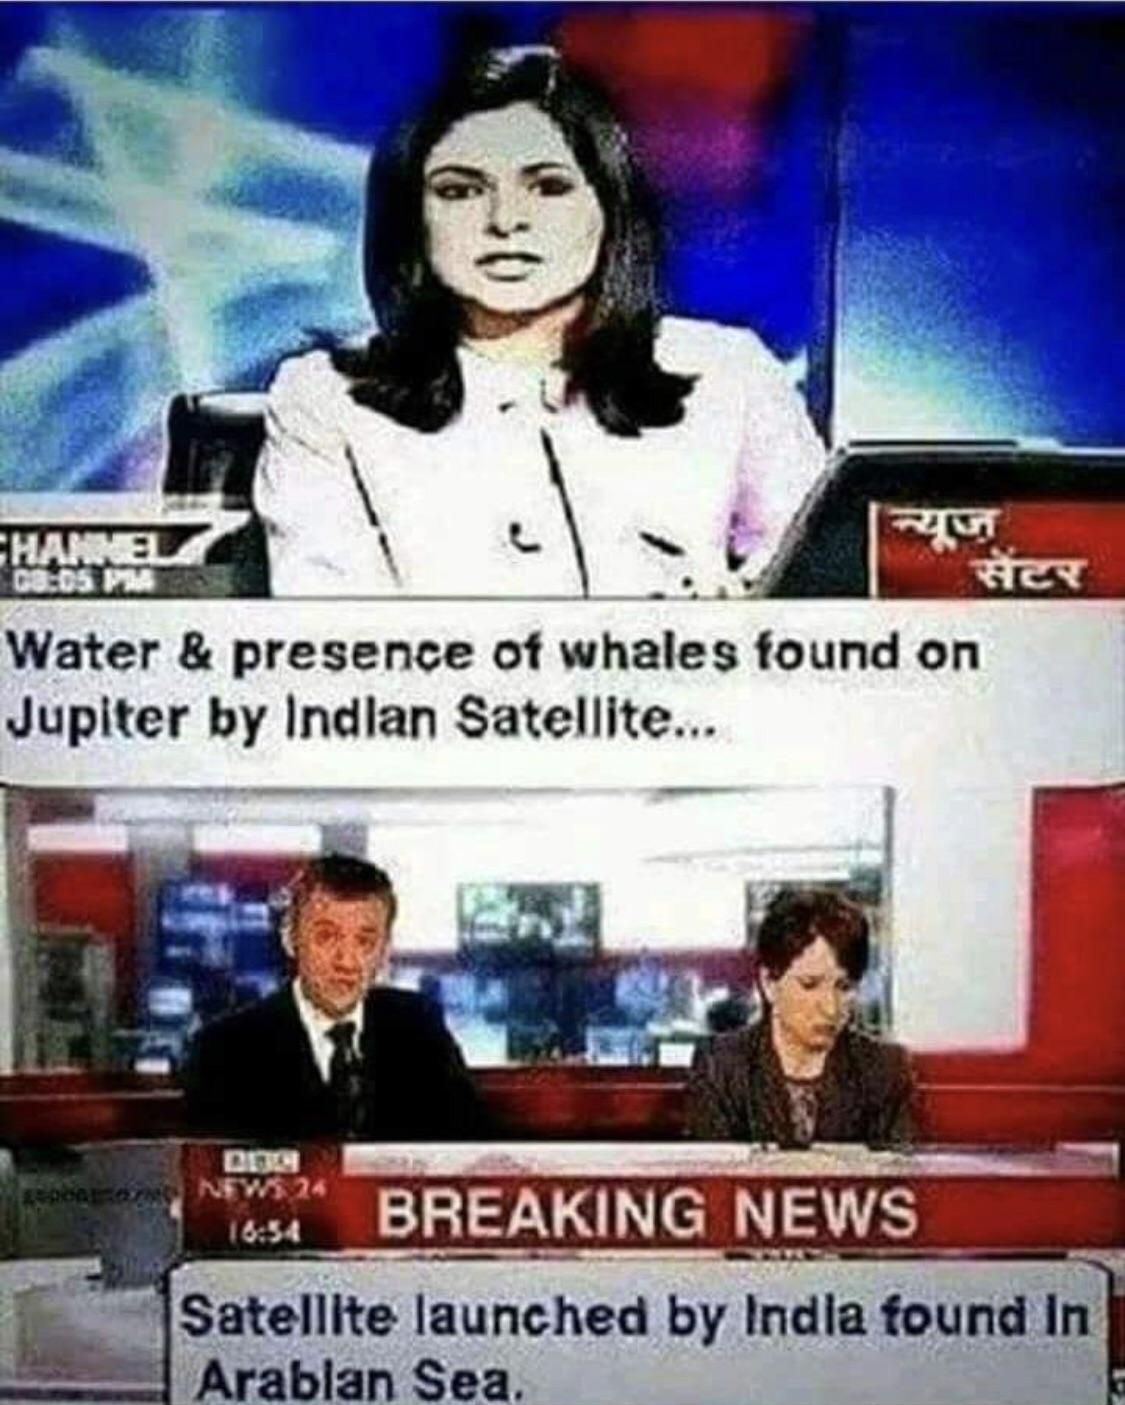 At least we know whales exist still